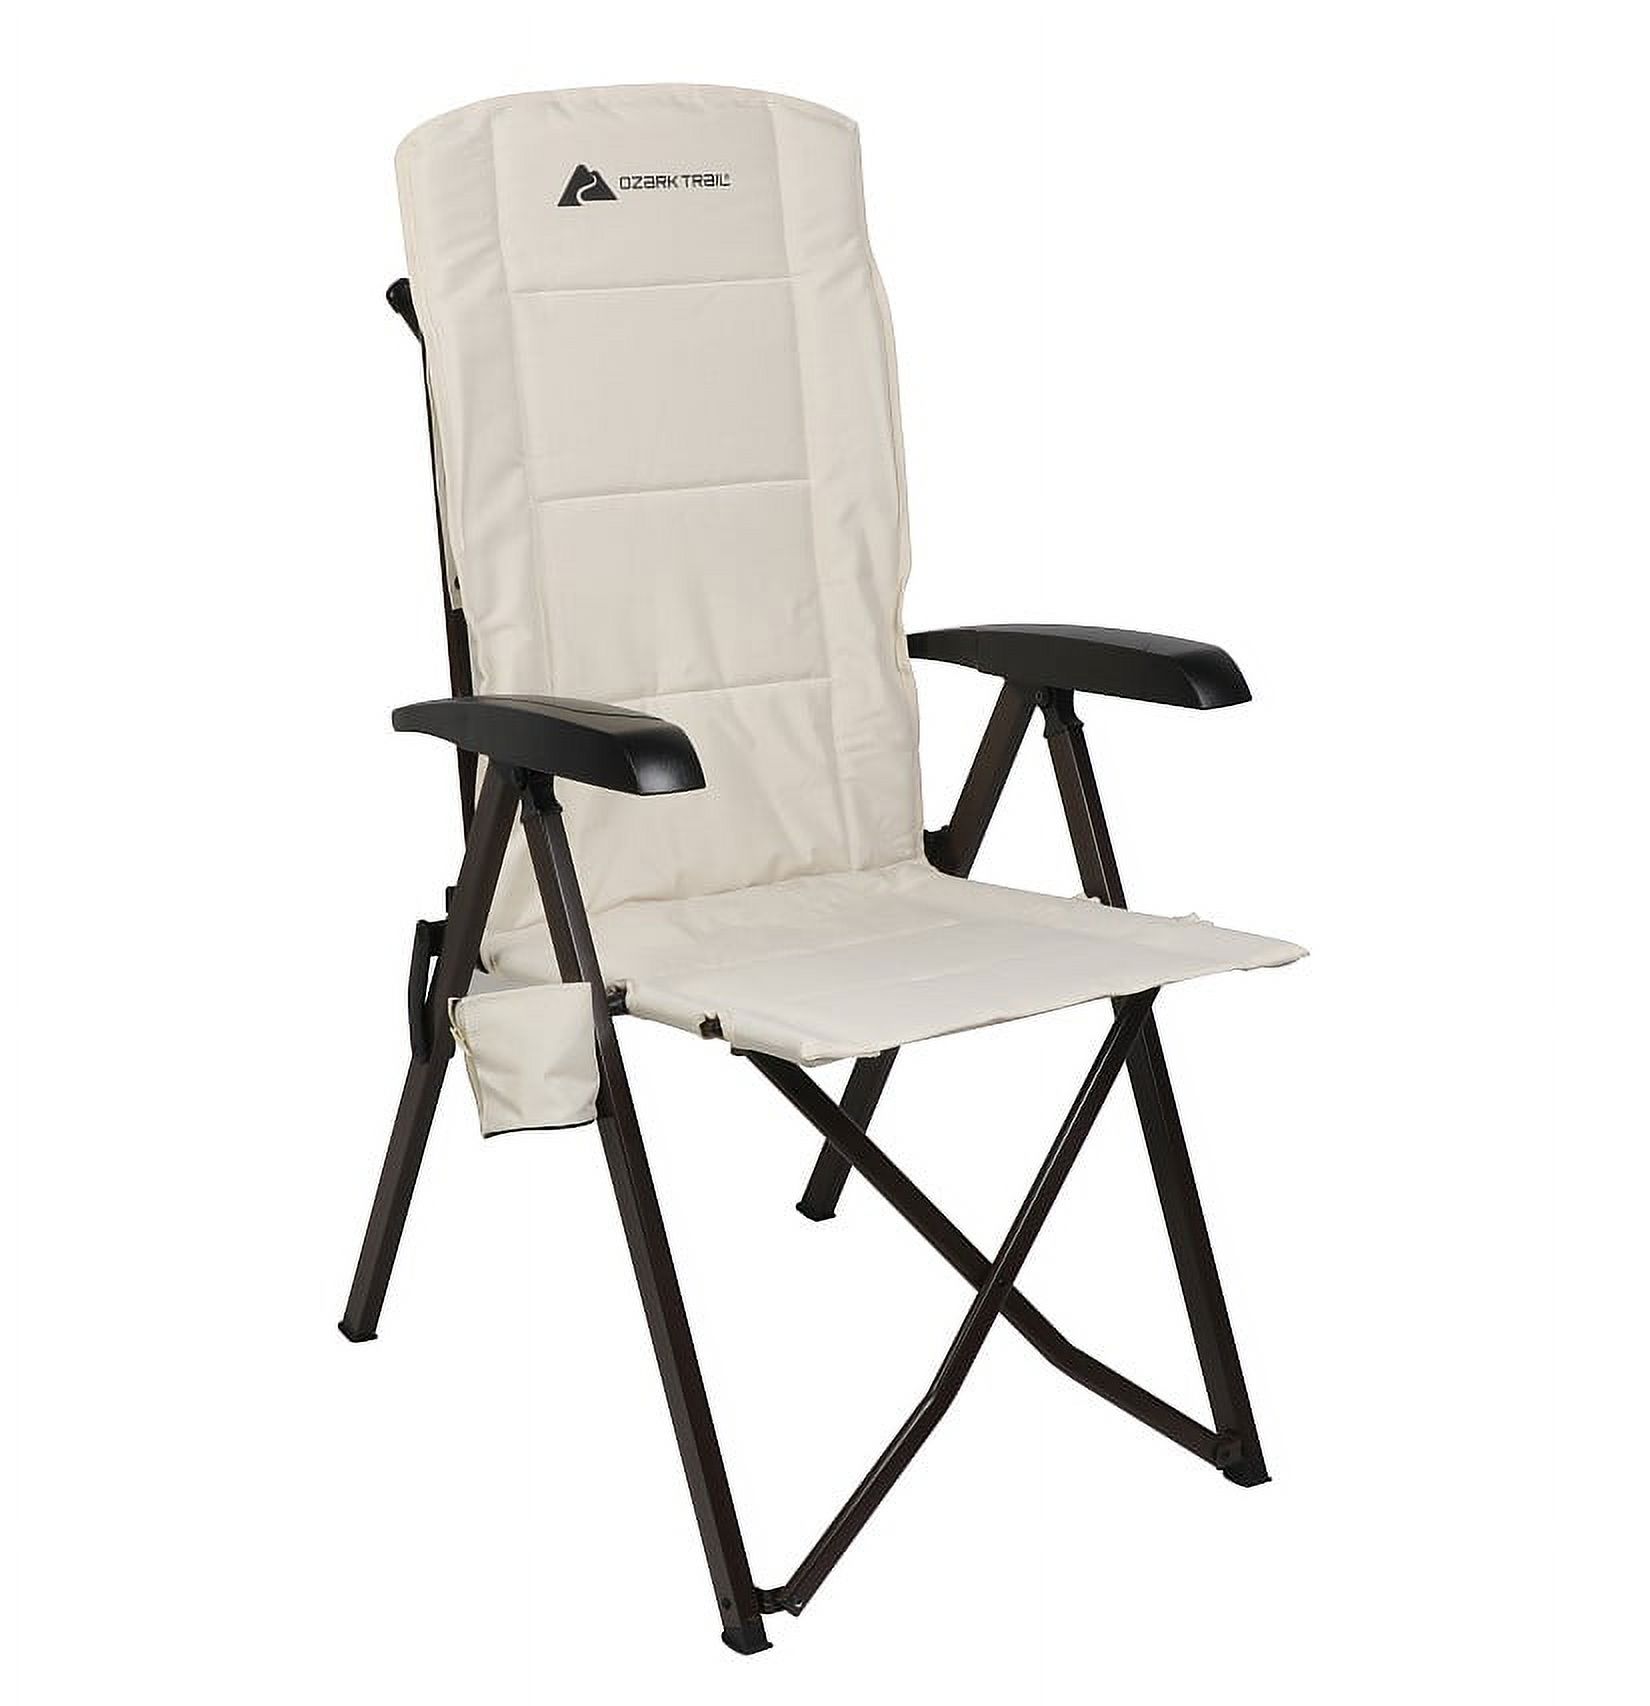 Ozark Trail Glamp High Back Lounge Chair, Adult, Taupe - image 4 of 7